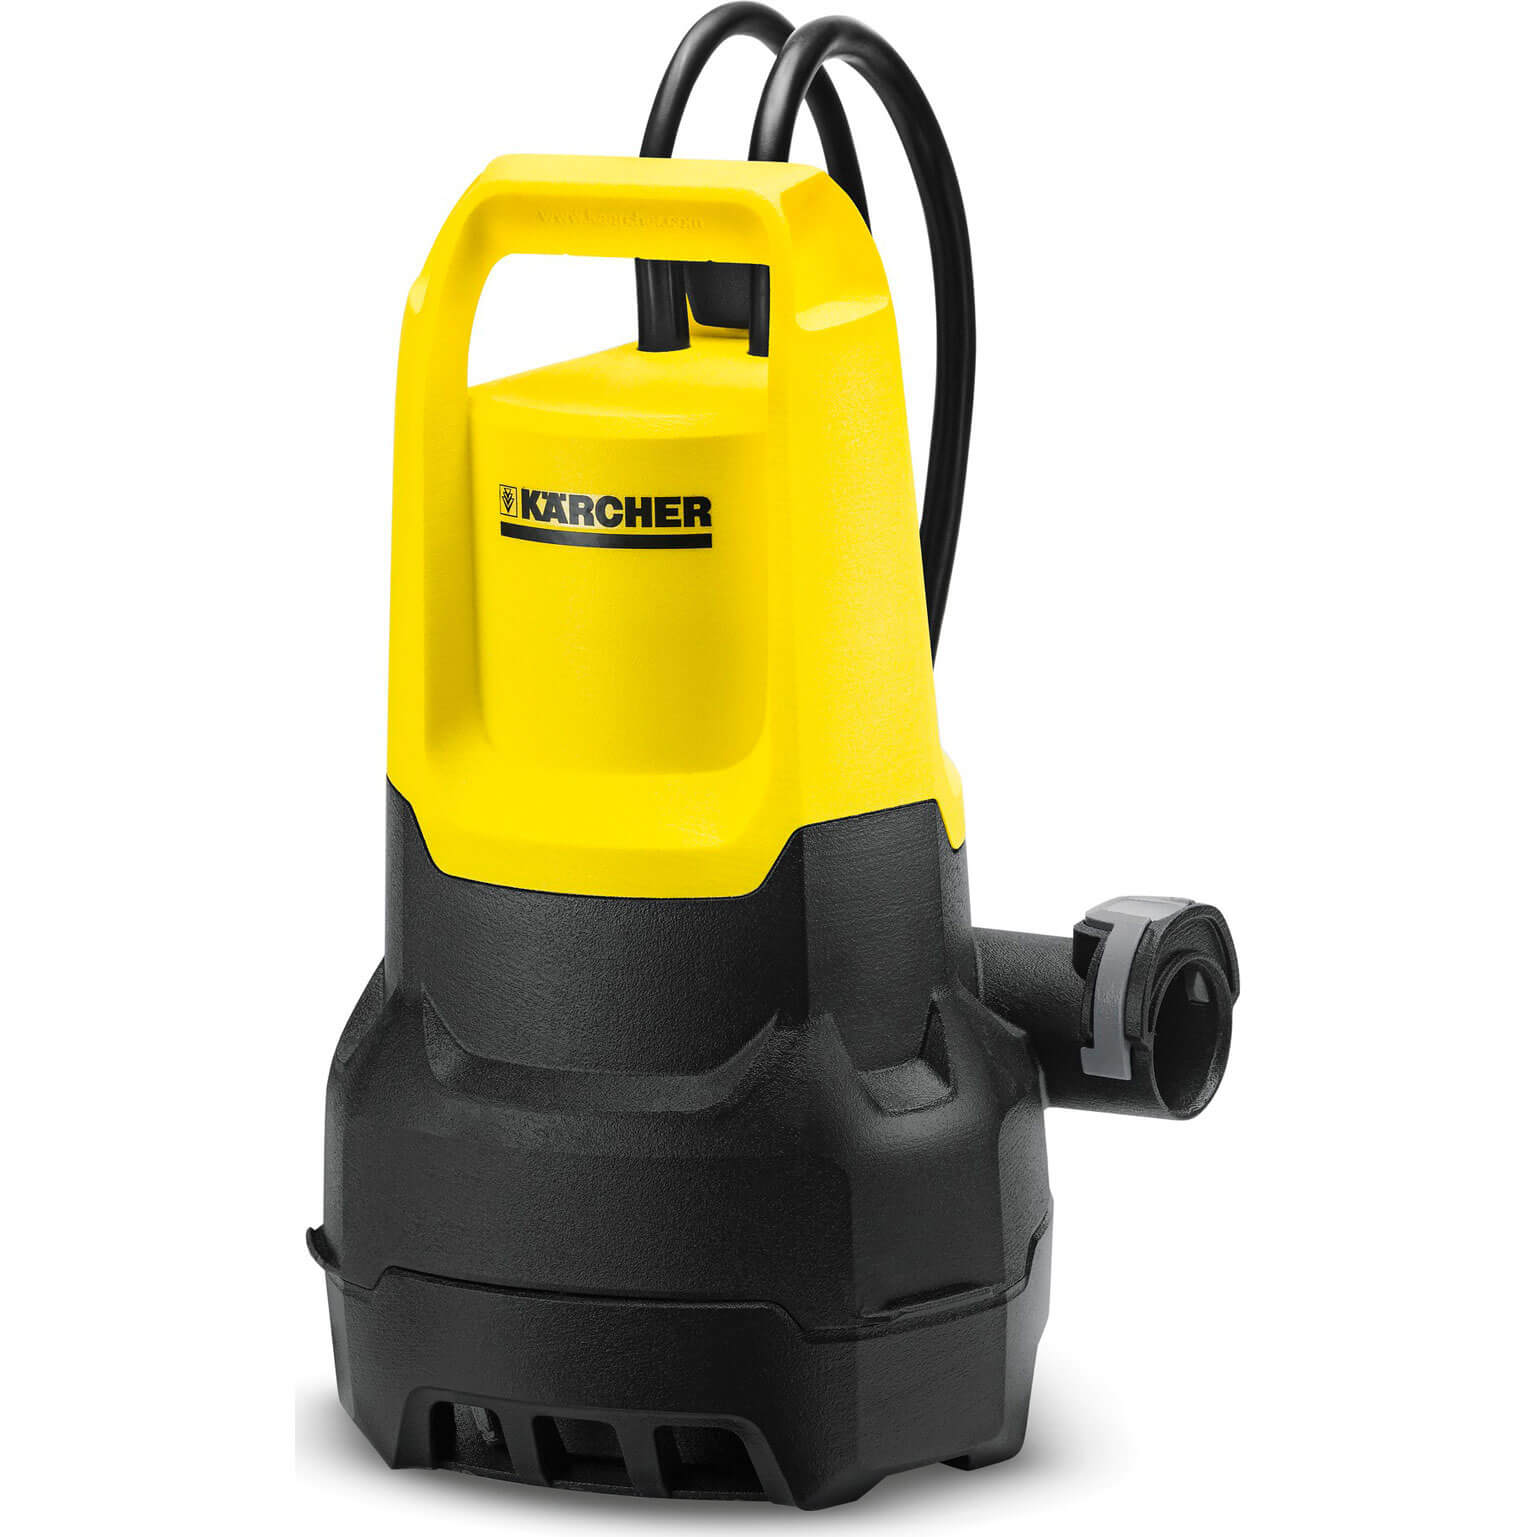 Image of Karcher SP 5 Submersible Dirty Water Pump 240v